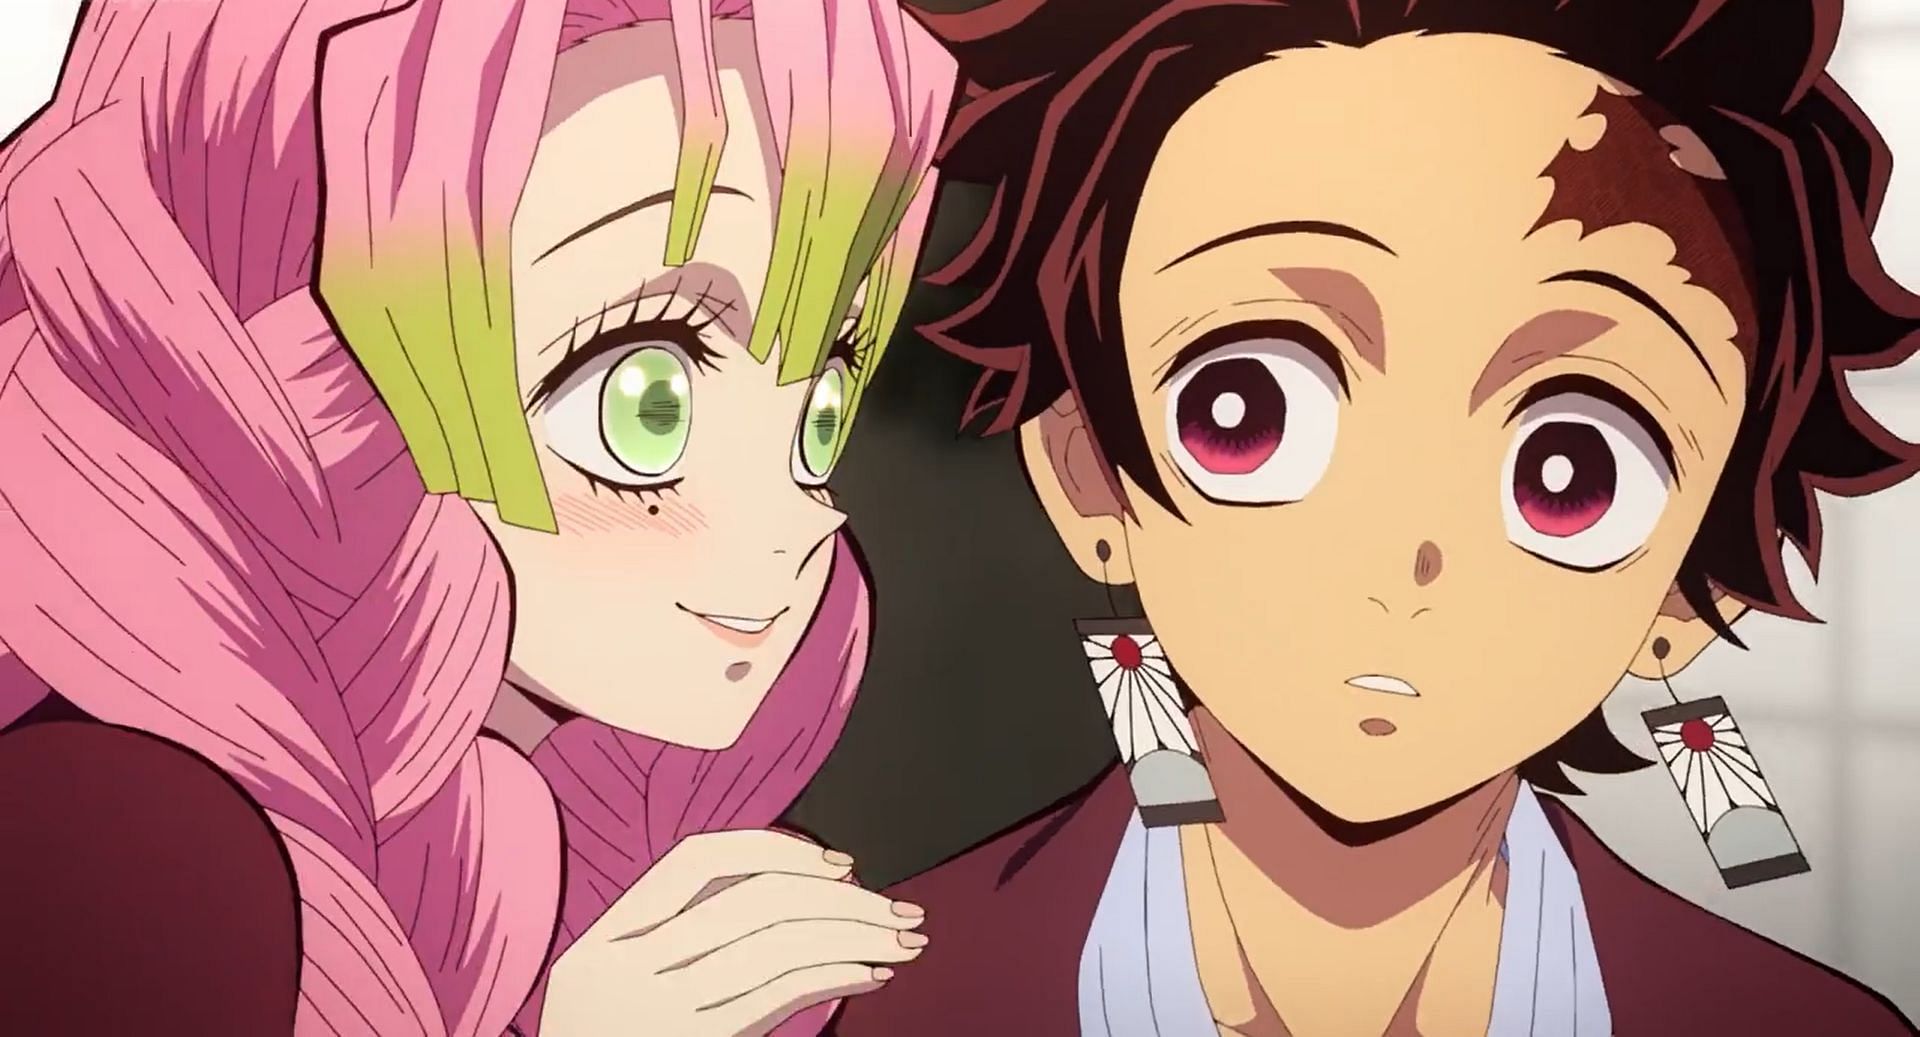 Understanding whether or not Mitsuri has a crush on Tanjiro in the Demon Slayer series (Image via Ufotable)